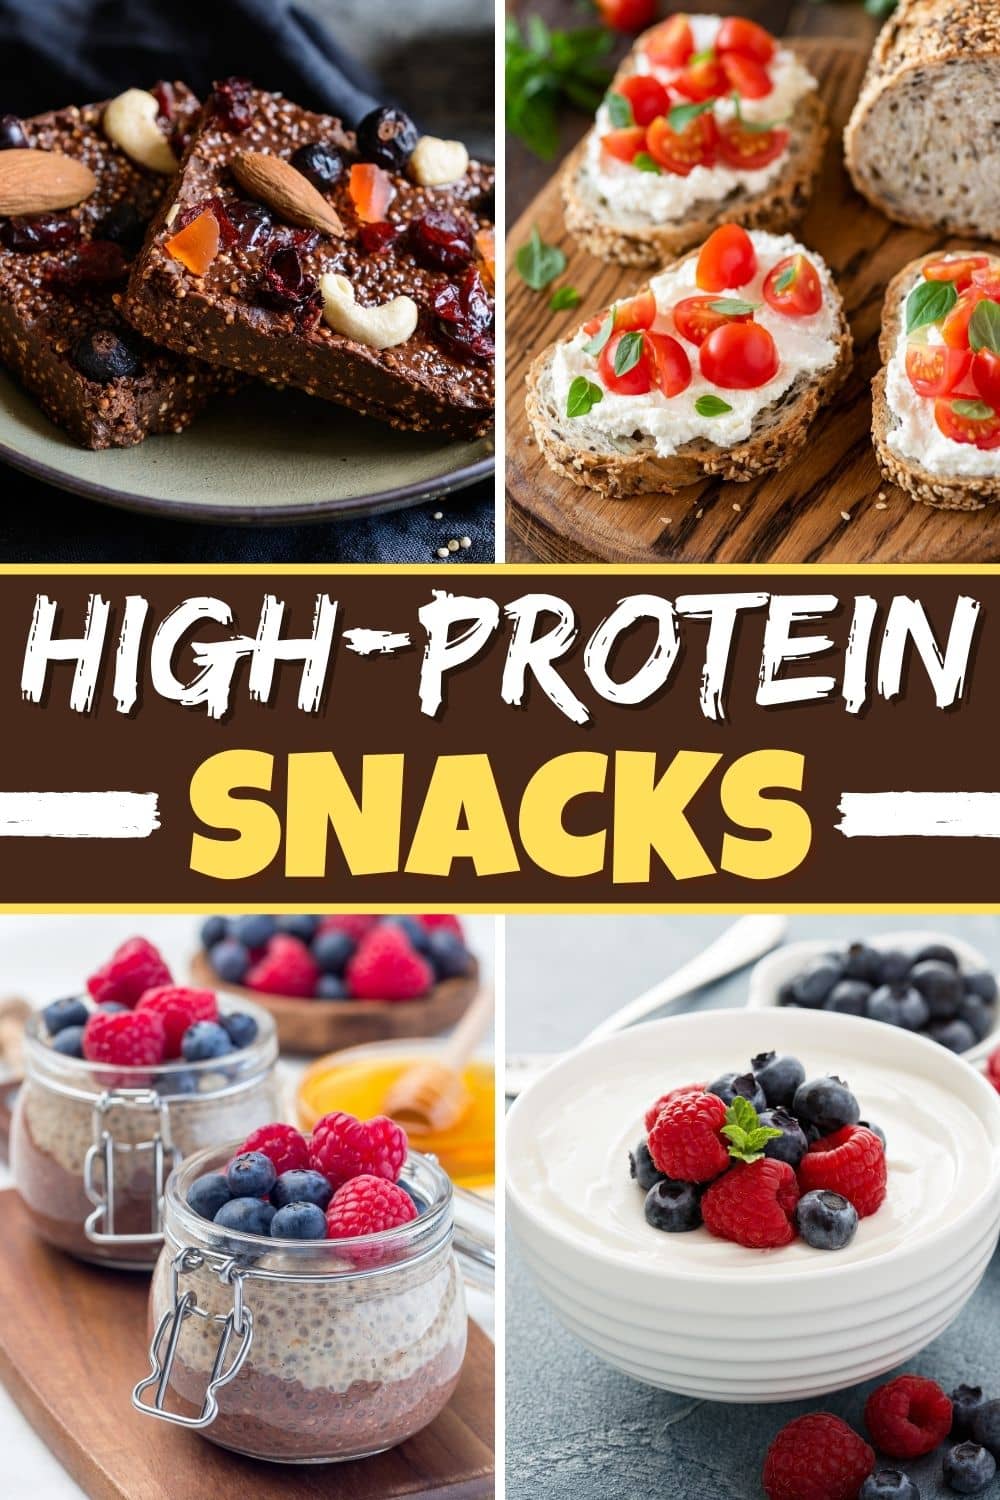 30 High-Protein Snacks to Curb Your Hunger - Insanely Good